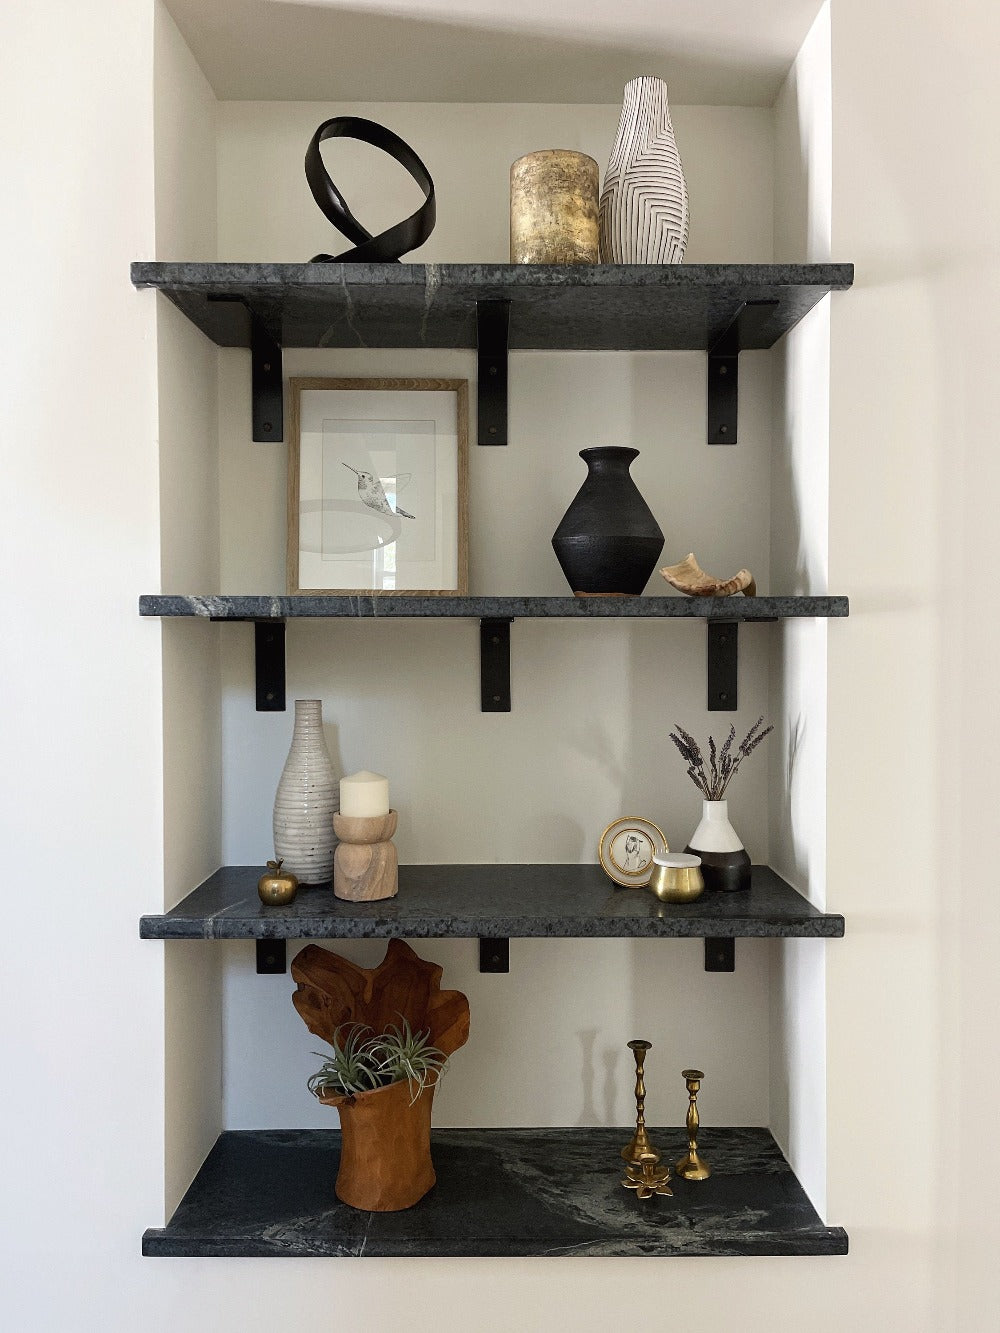 marble shelves with black brackets in wall nook